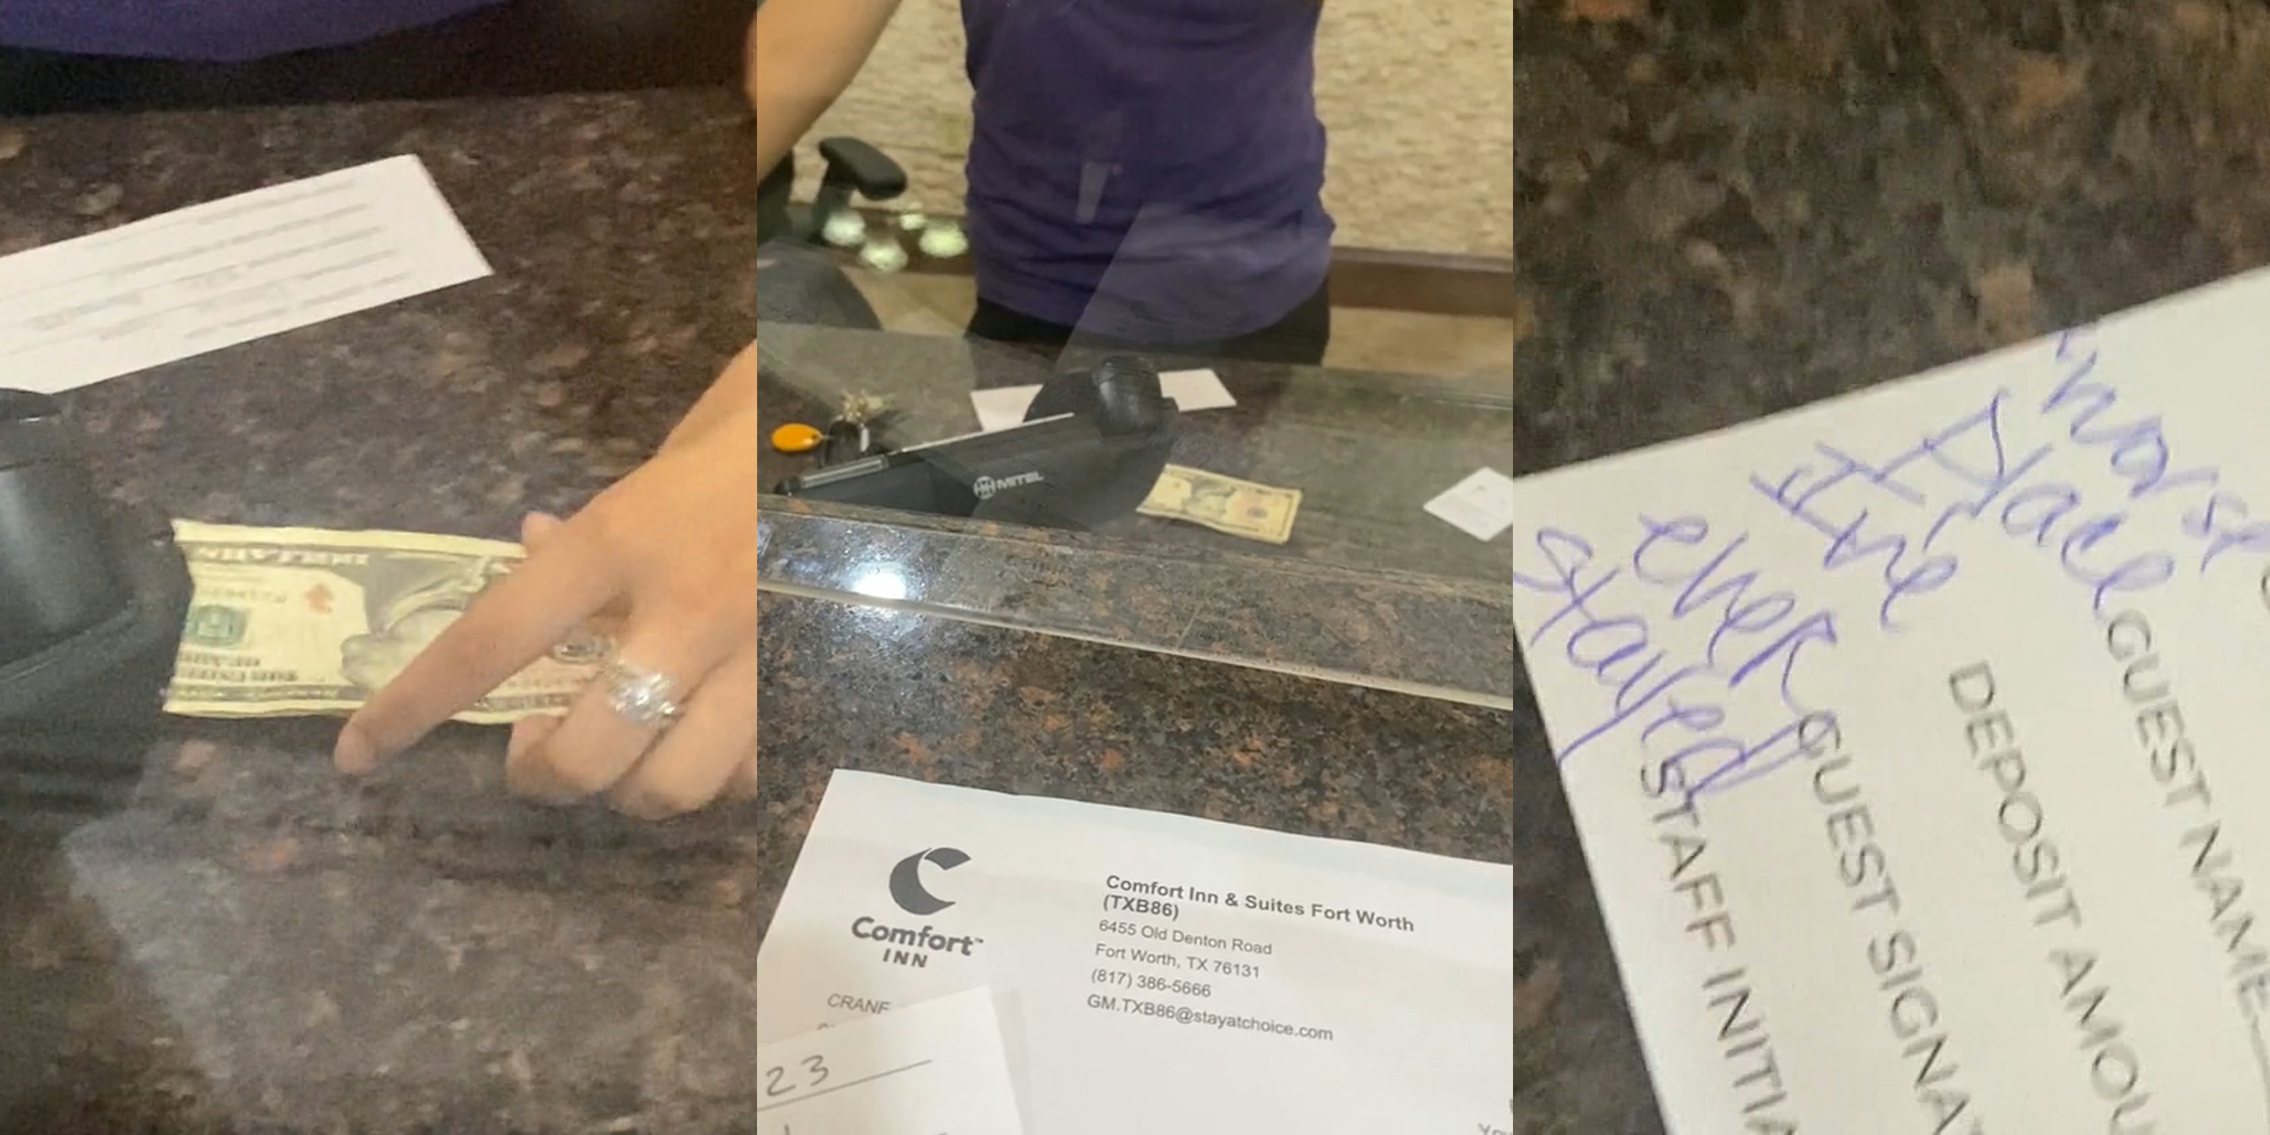 hotel worker behind counter with cash (l) hotel worker behind counter with cash speaking to guest (c) deposit return slip for hotel with written message 'worse place I've ever stayed' (r)